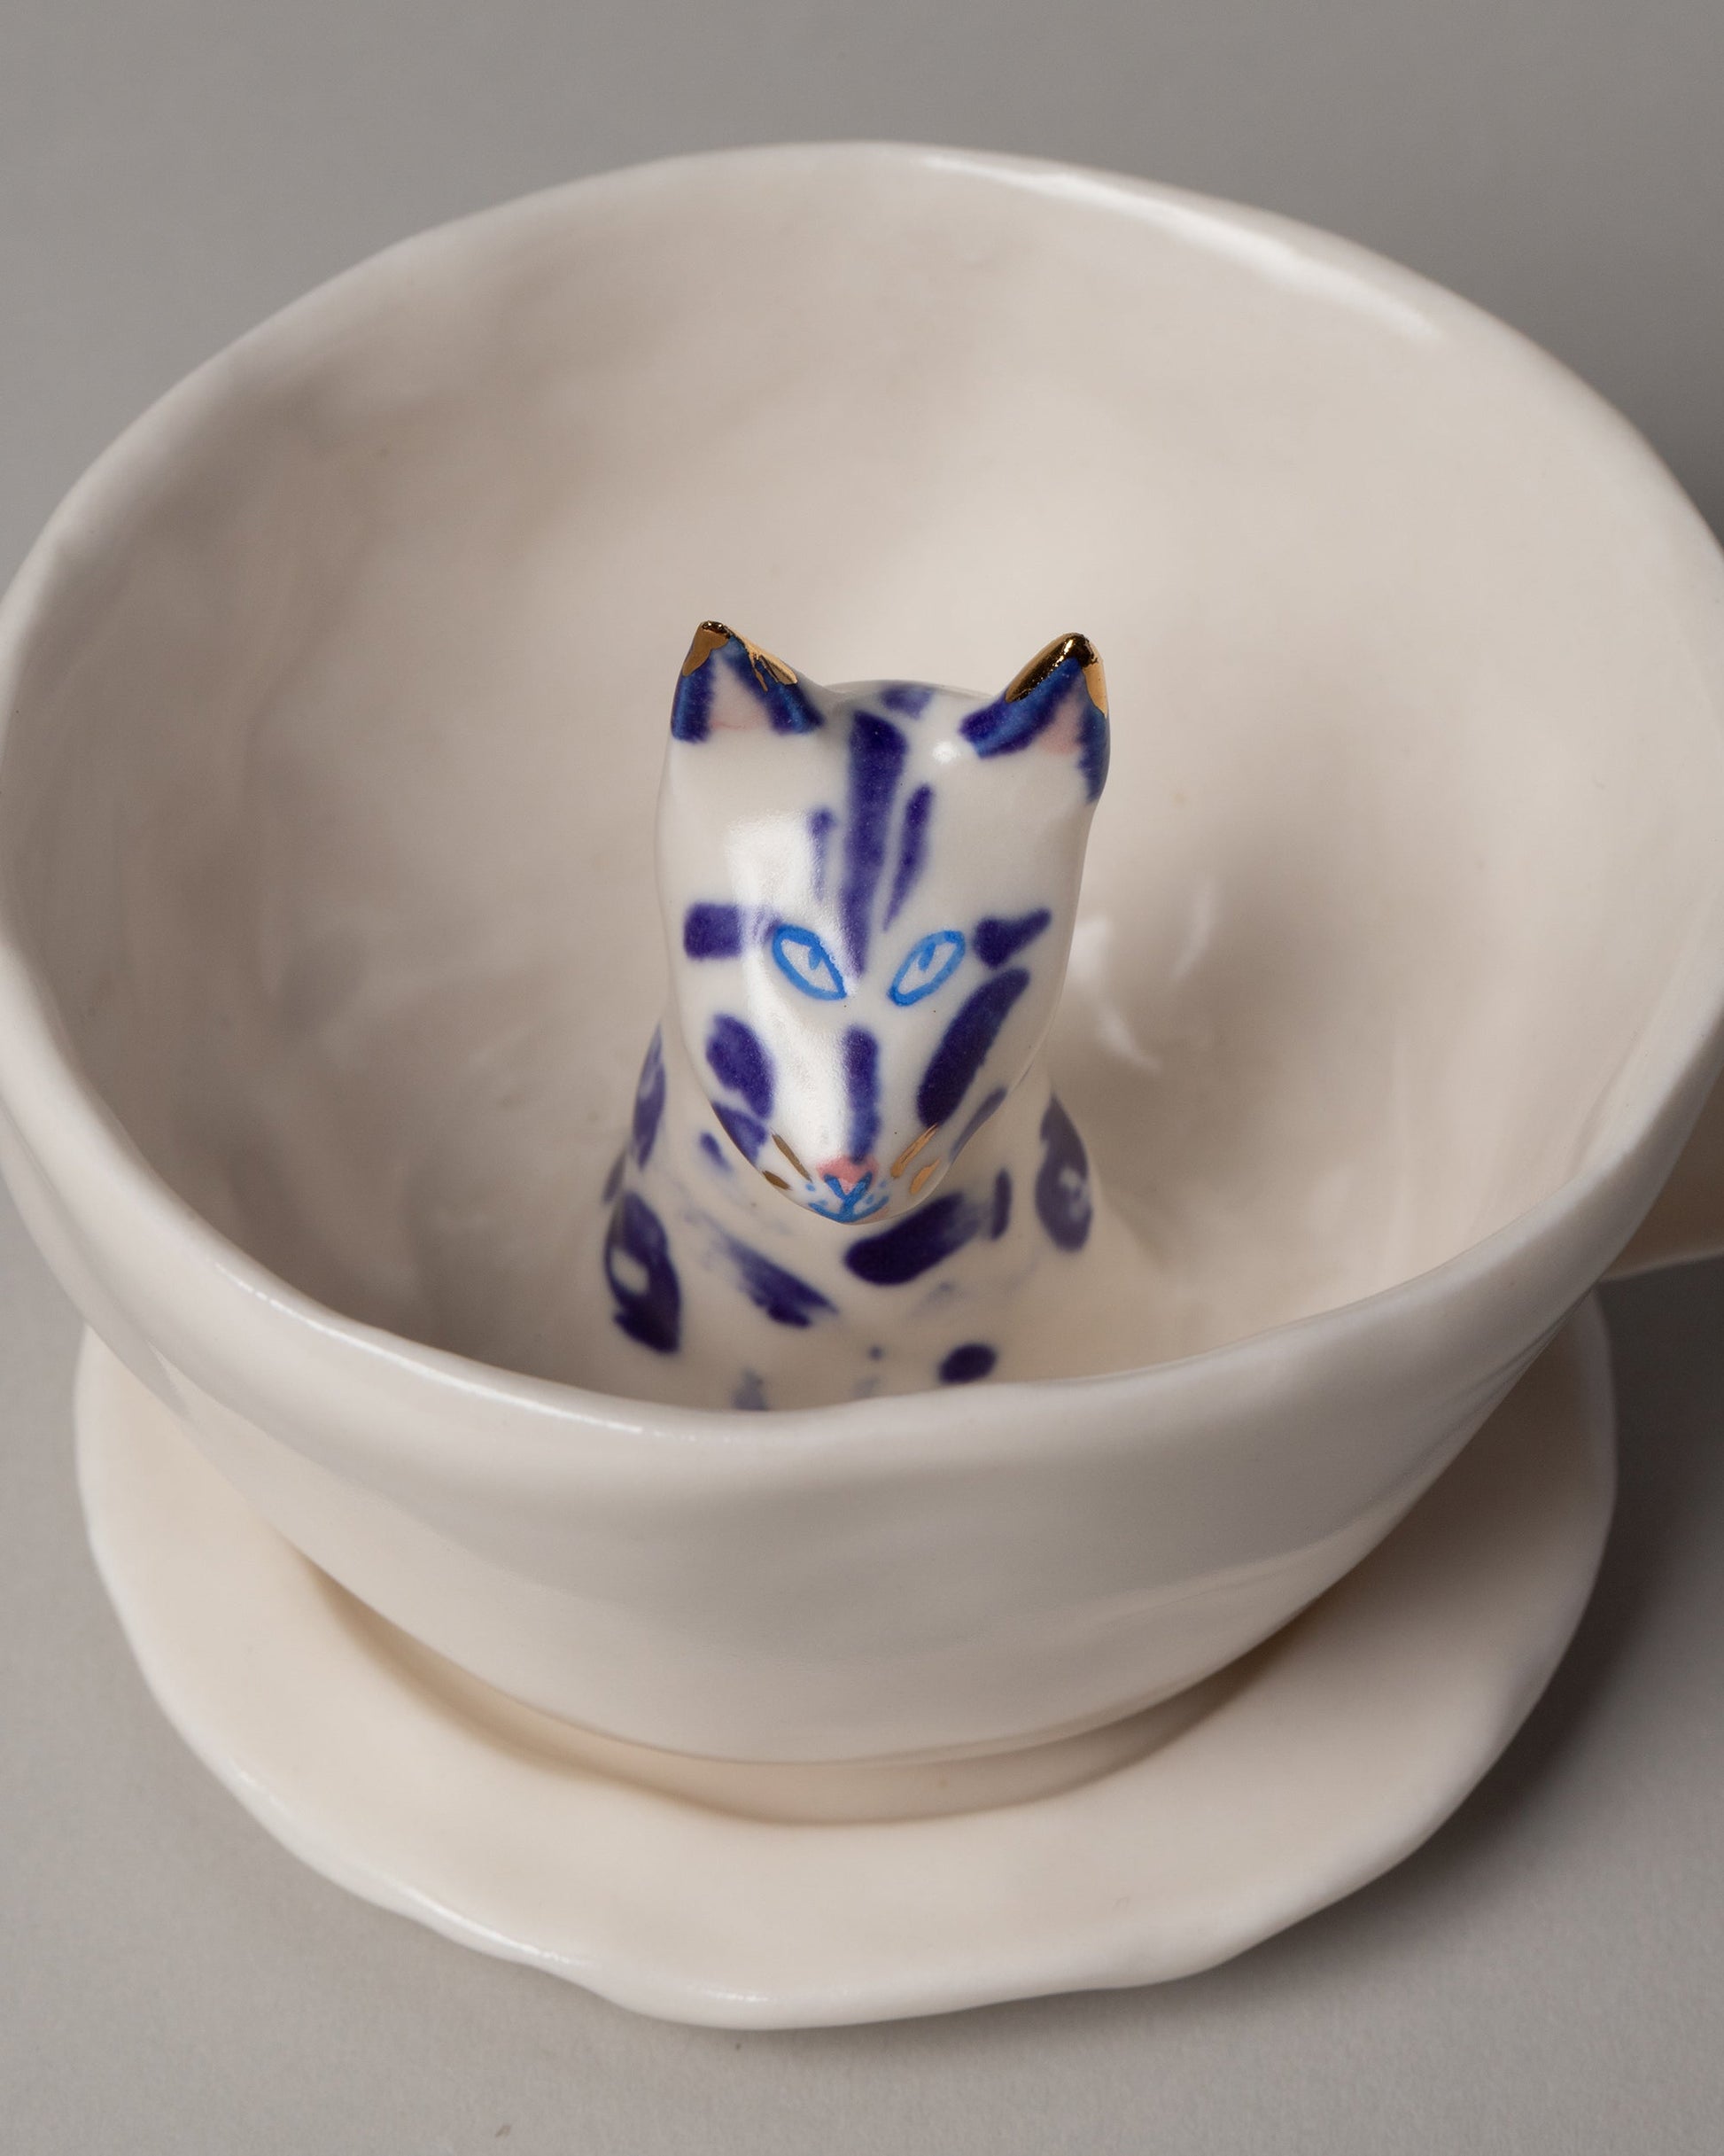 Closeup detail of the Eleonor Boström Blue Spots Cat Tea Cup with Saucer on light color background.